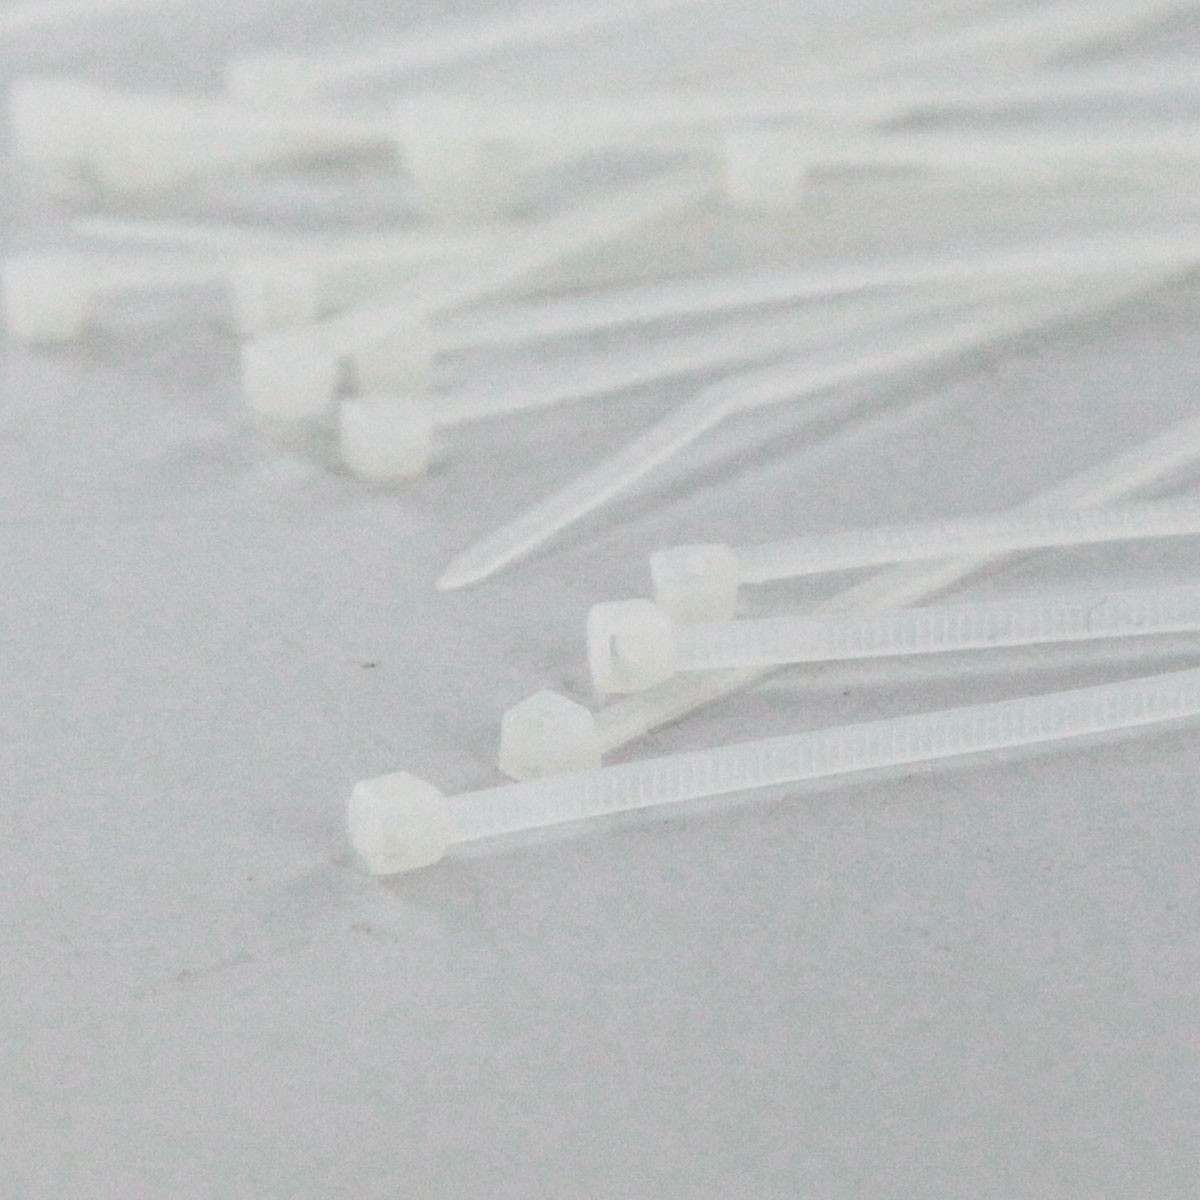 100mm x 2.5mm Cable Ties, 20pcs image 4